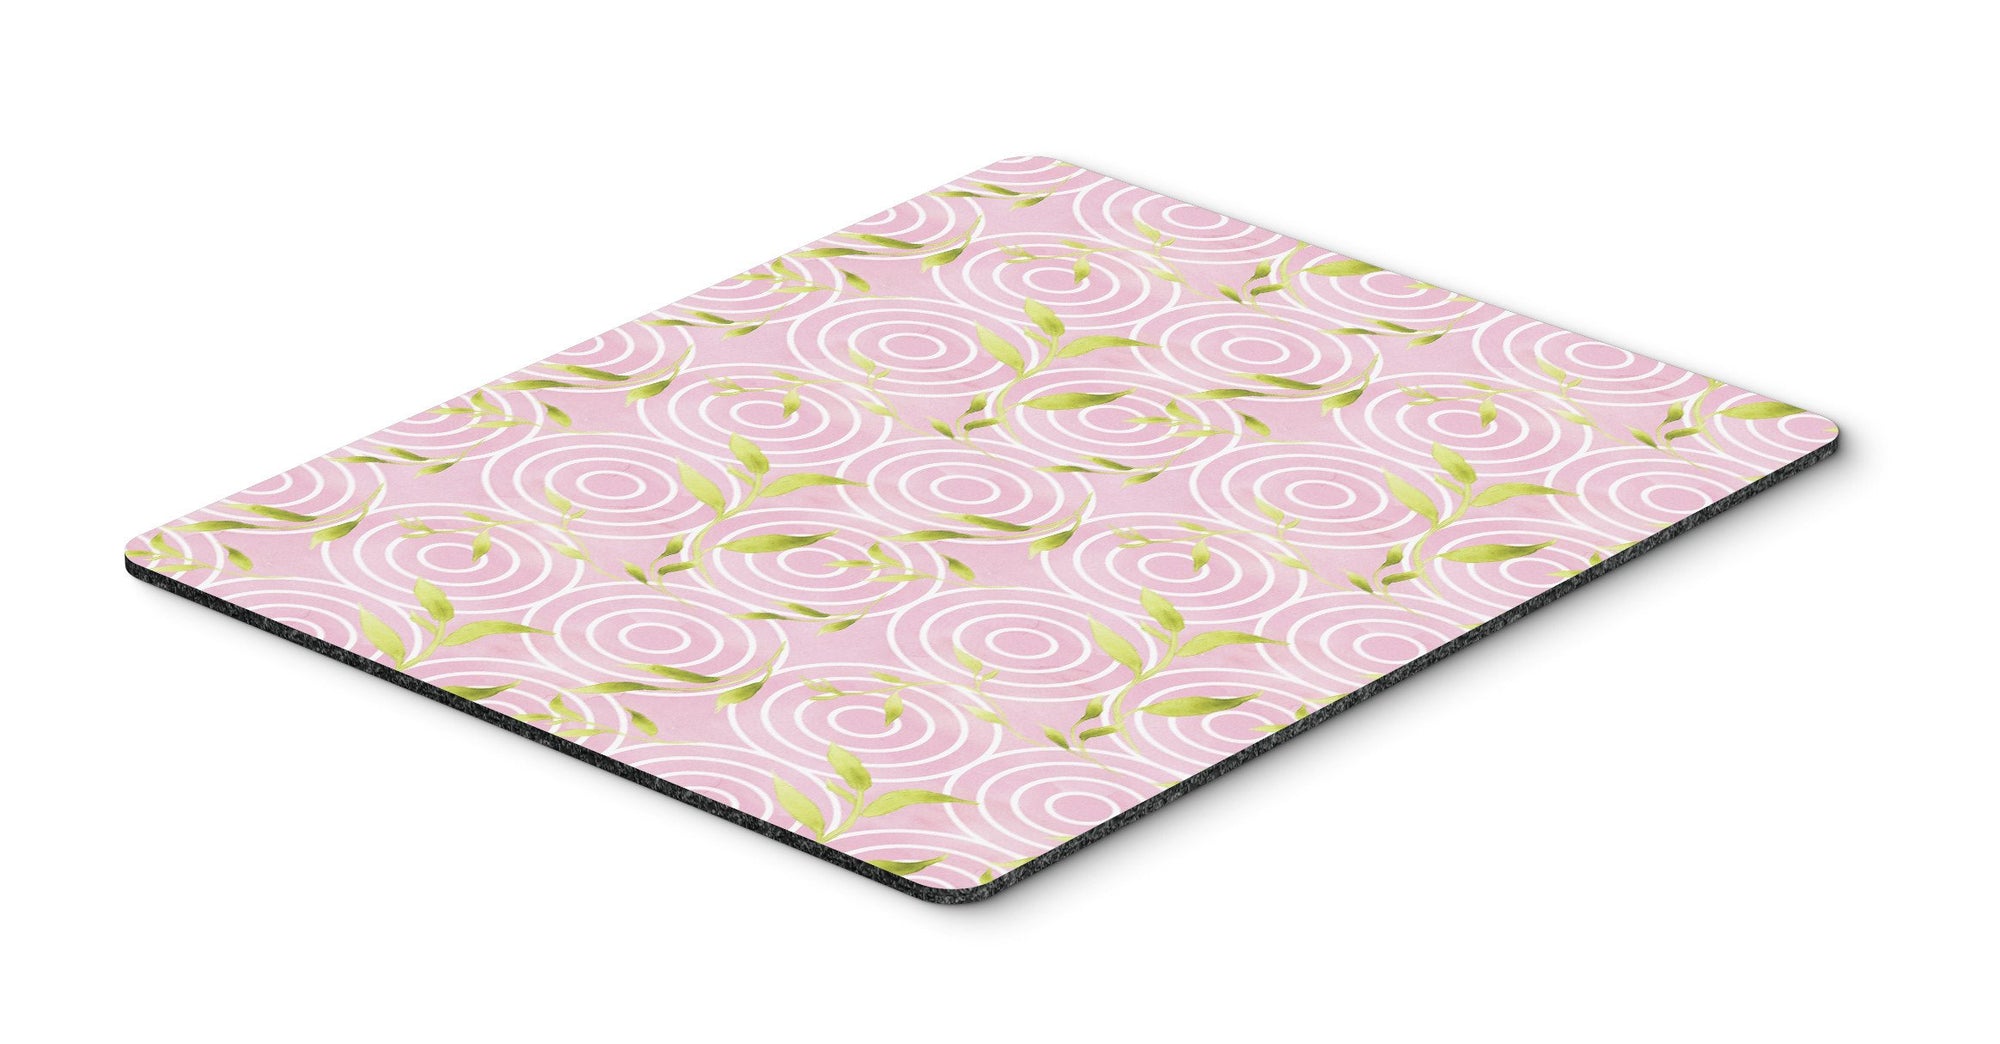 Gemoetric Circles on Pink Watercolor Mouse Pad, Hot Pad or Trivet BB7492MP by Caroline's Treasures